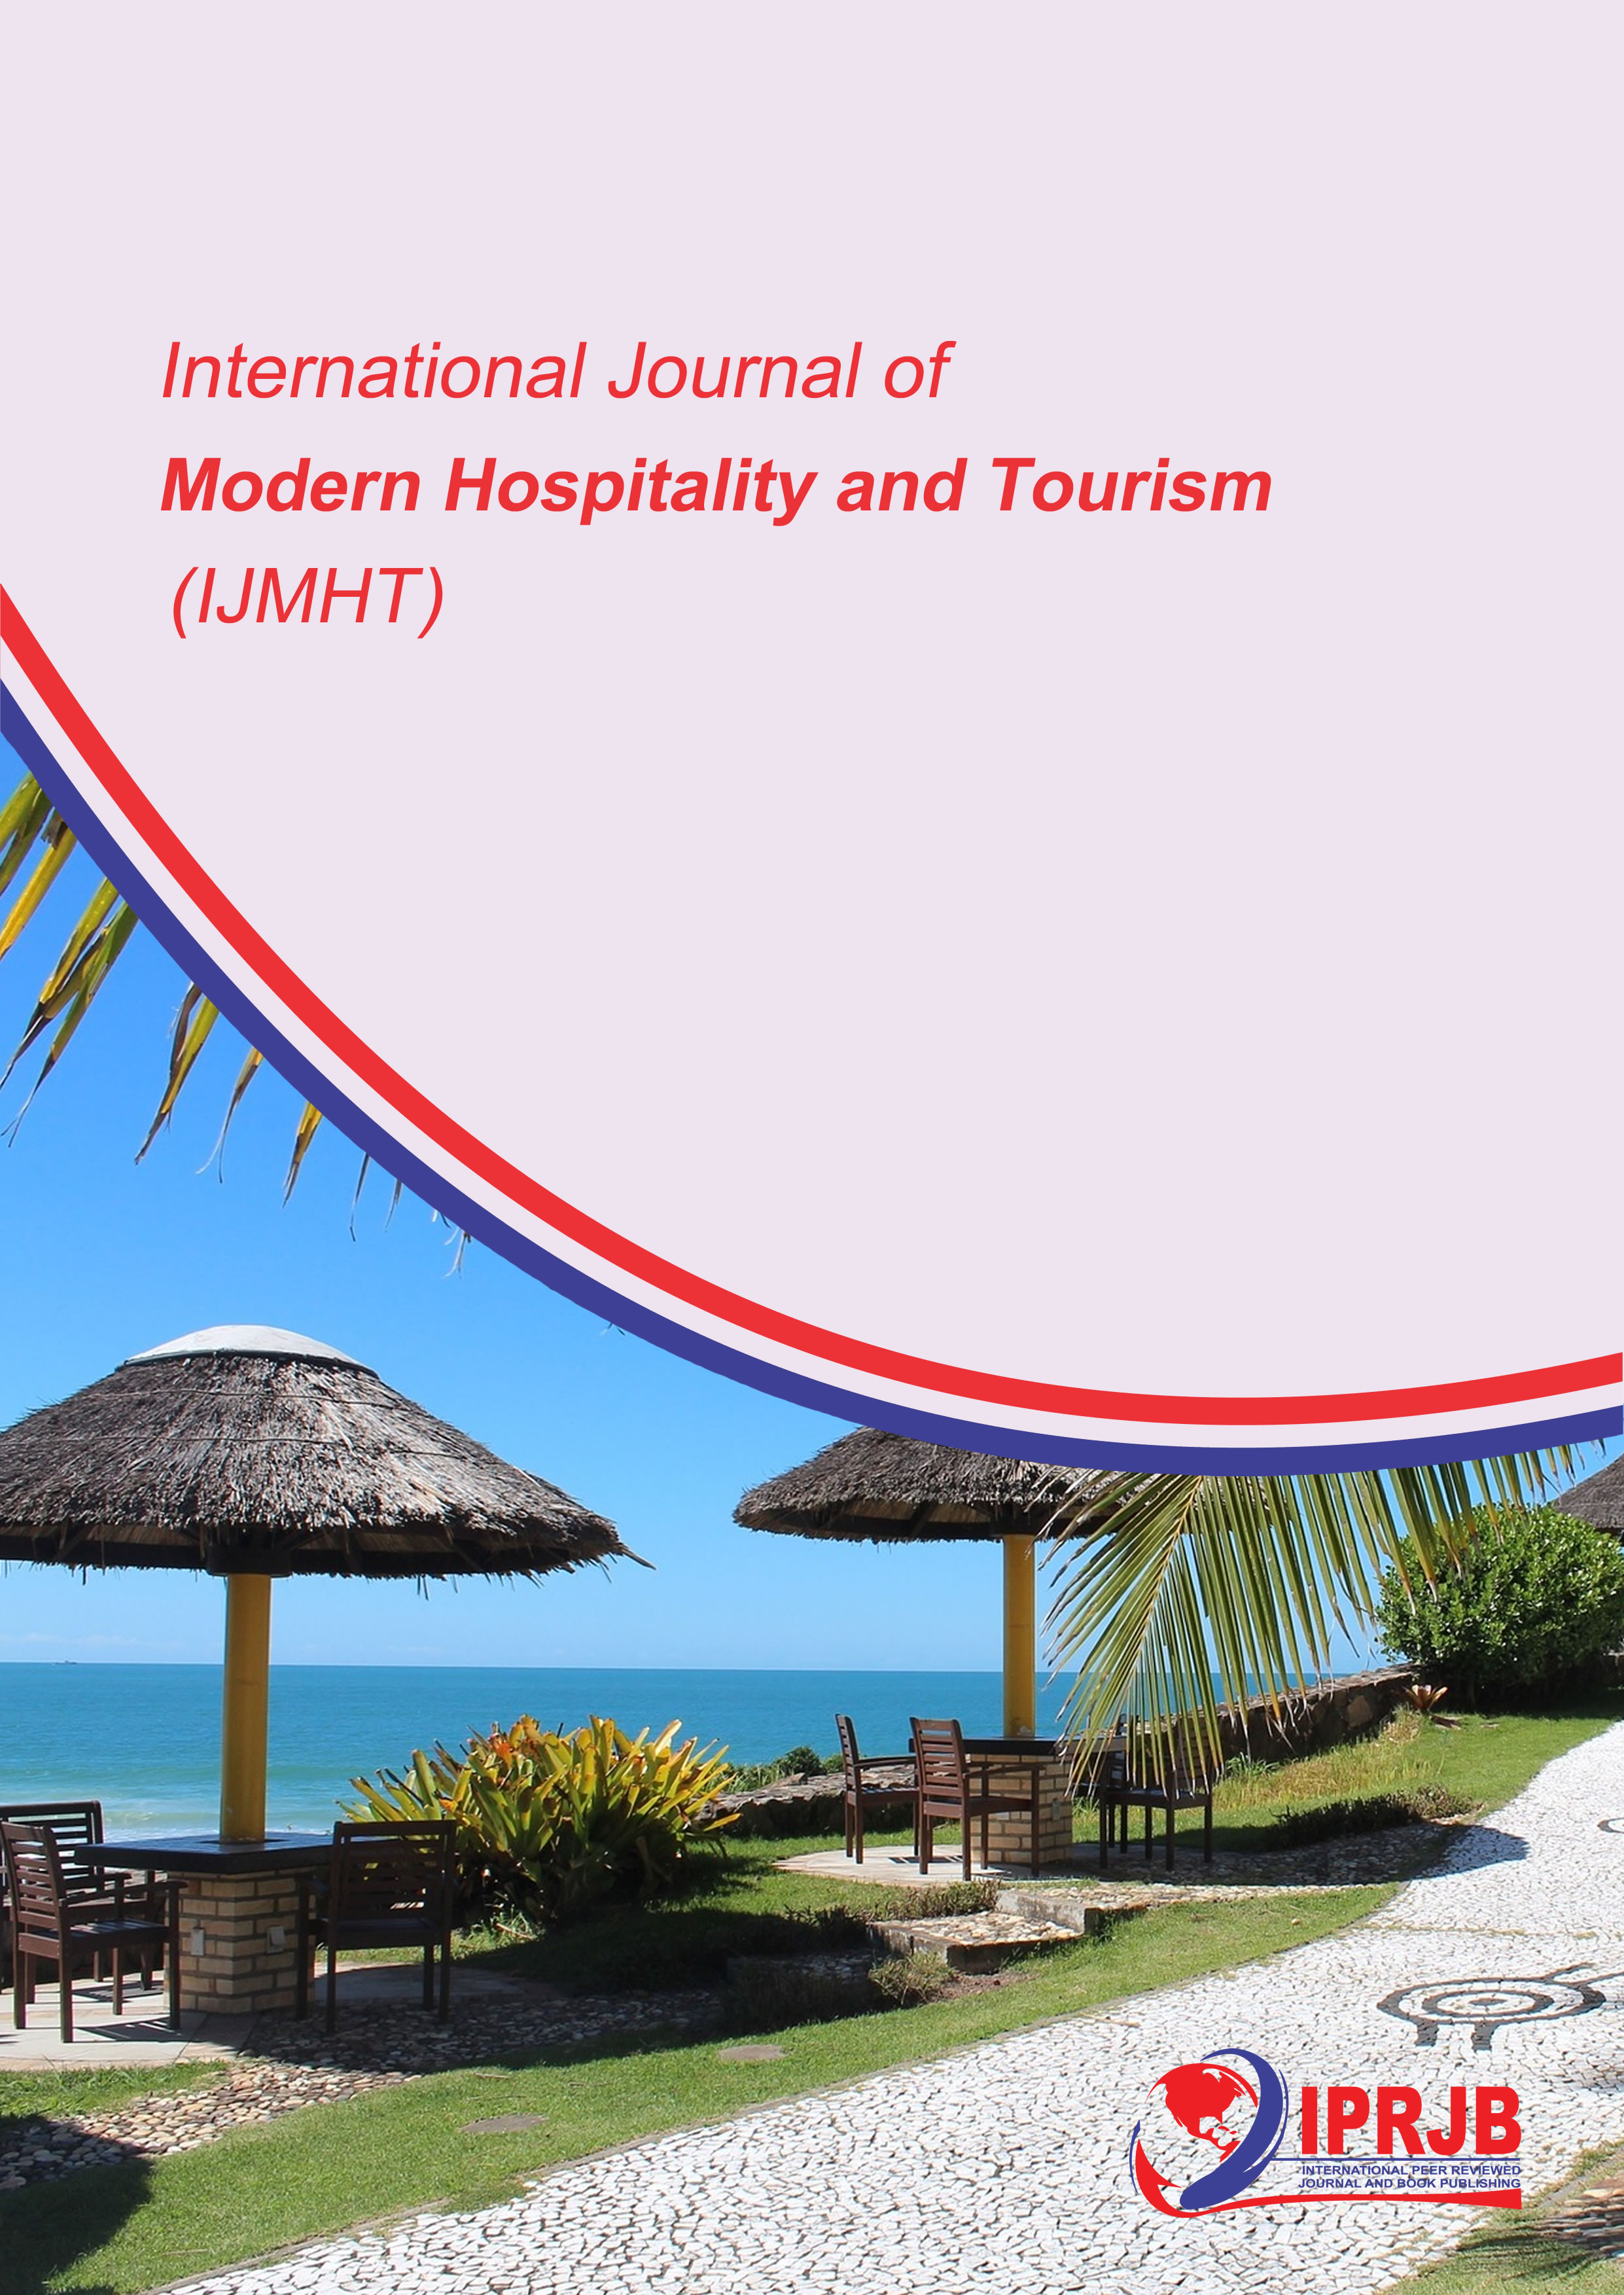 hospitality and tourism news articles